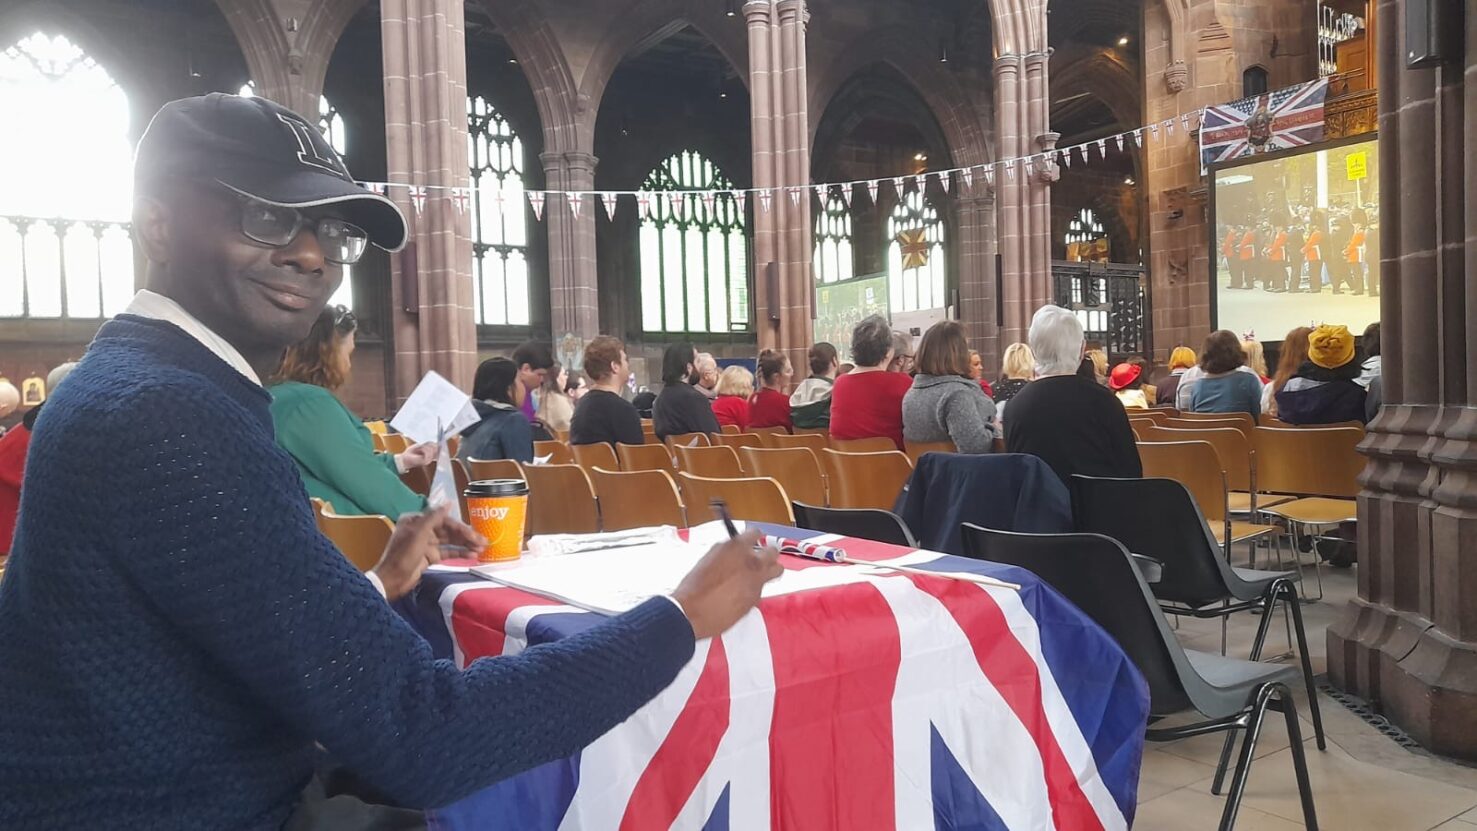 A man, Leslie Thompson, sat drawing at a table with a union jack flag on it in Manchester Cathedral.